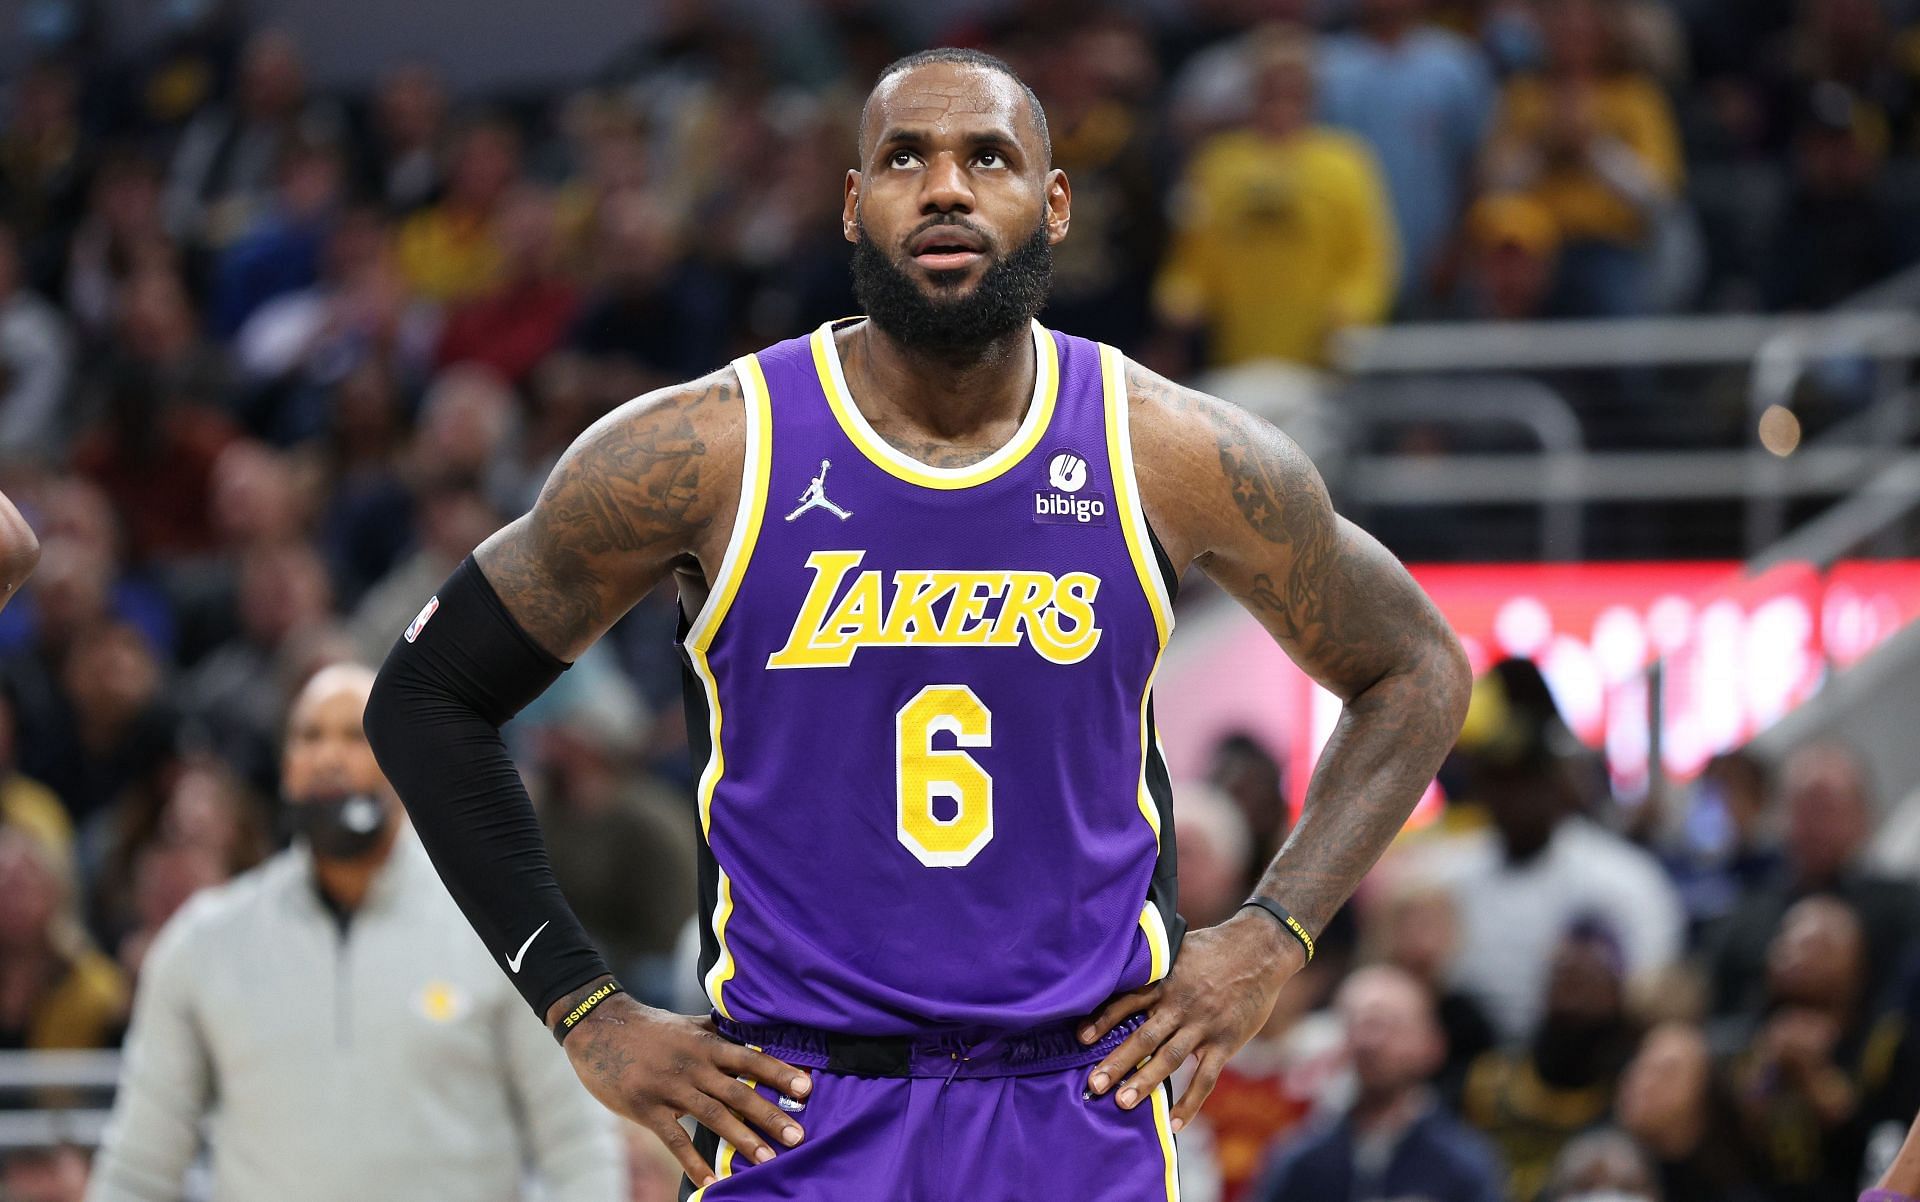 LeBron James has been cleared to return to play for the LA Lakers